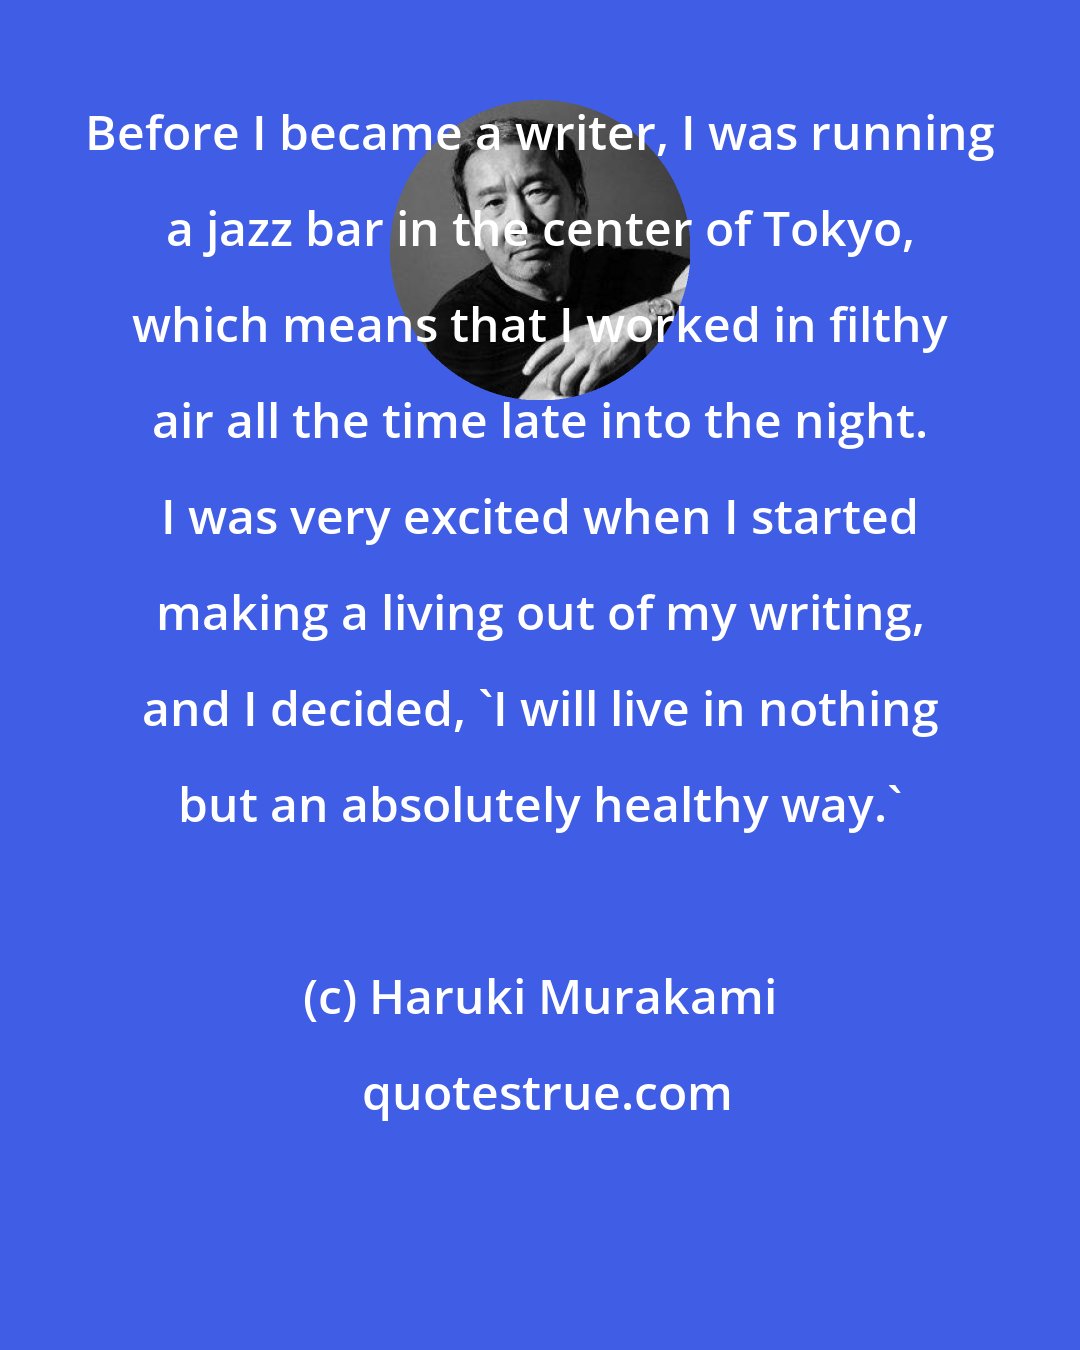 Haruki Murakami: Before I became a writer, I was running a jazz bar in the center of Tokyo, which means that I worked in filthy air all the time late into the night. I was very excited when I started making a living out of my writing, and I decided, 'I will live in nothing but an absolutely healthy way.'